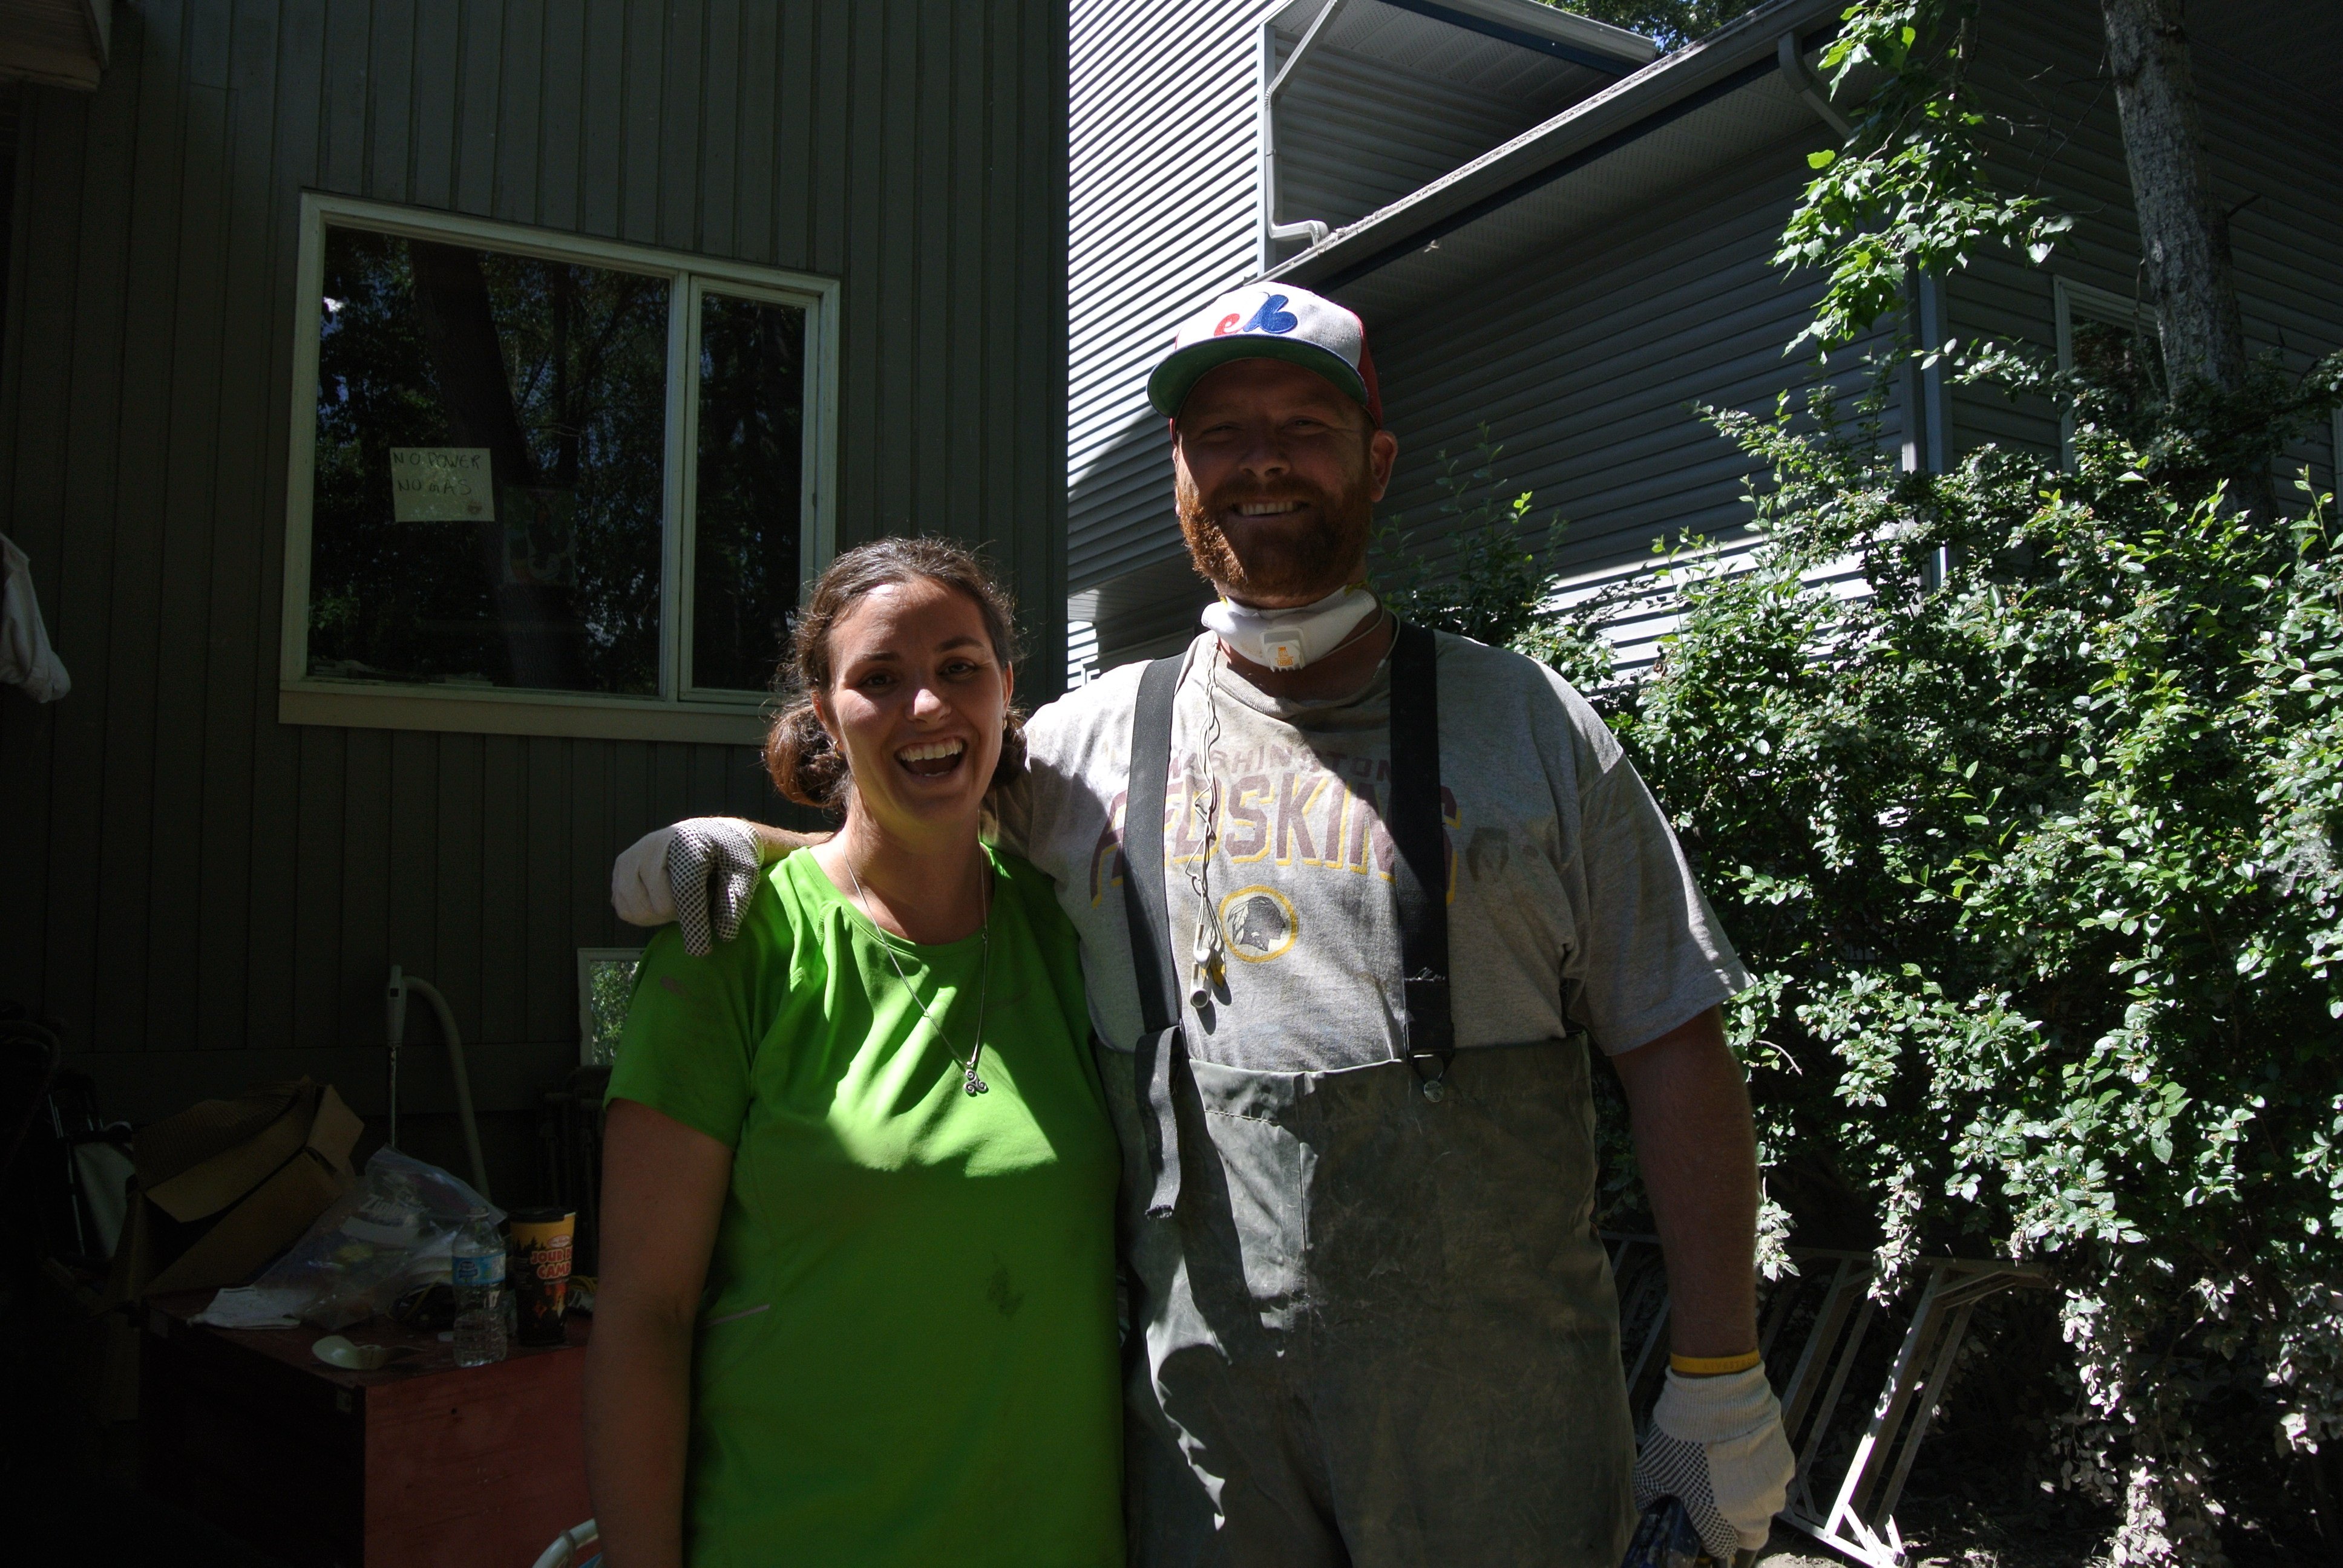 Residents Tasha and Ian Royer were actively cleaning up after the flood.